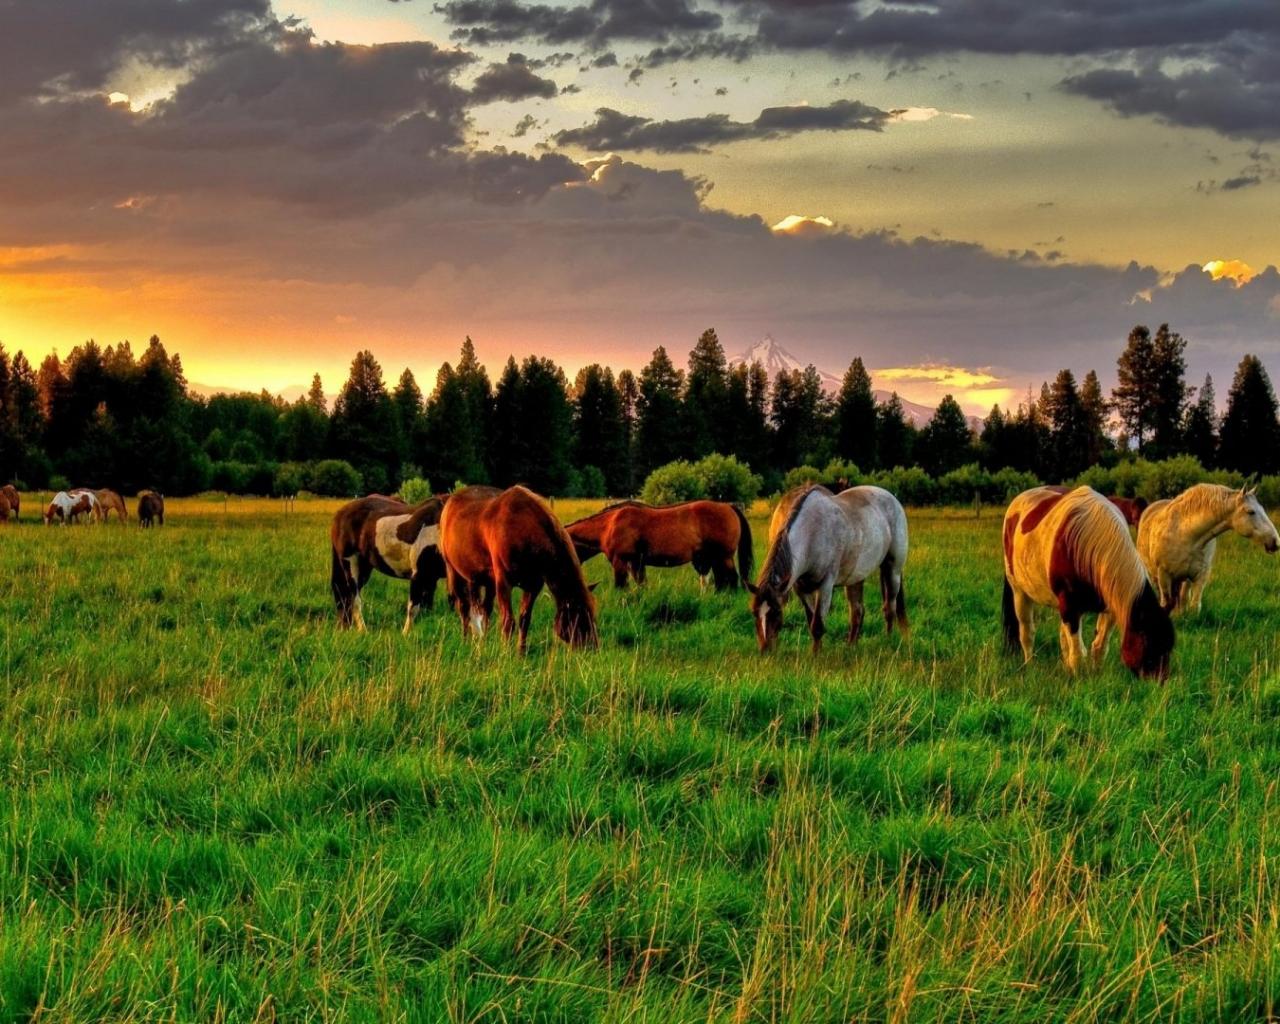 Horse in Sunset Wallpaper 1080p photo 1280x1024 Notebook/LCD wall#919